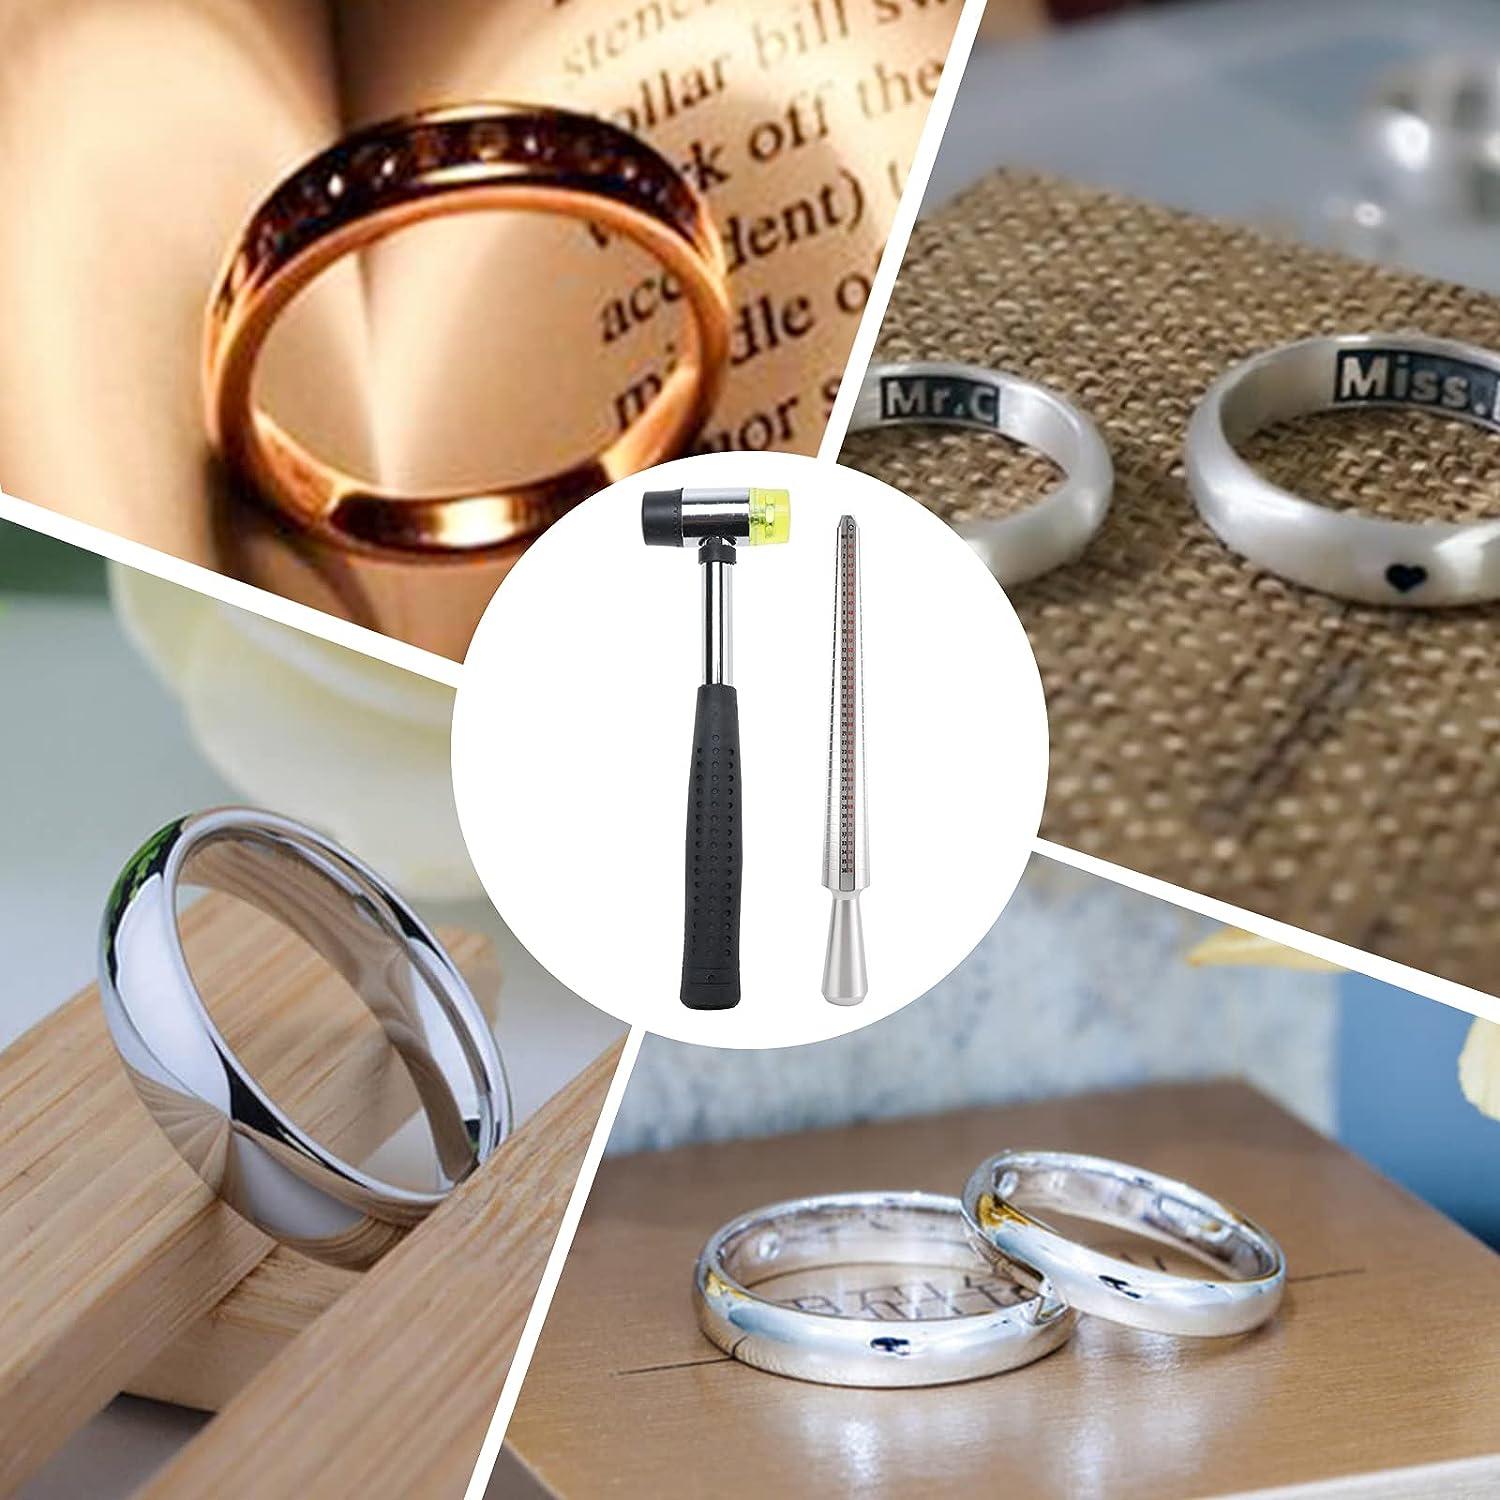 Ring Size Stick Finger Gauge Ring Sizer Measuring Jewelry Tool Ring Meter  for Measure The Ring